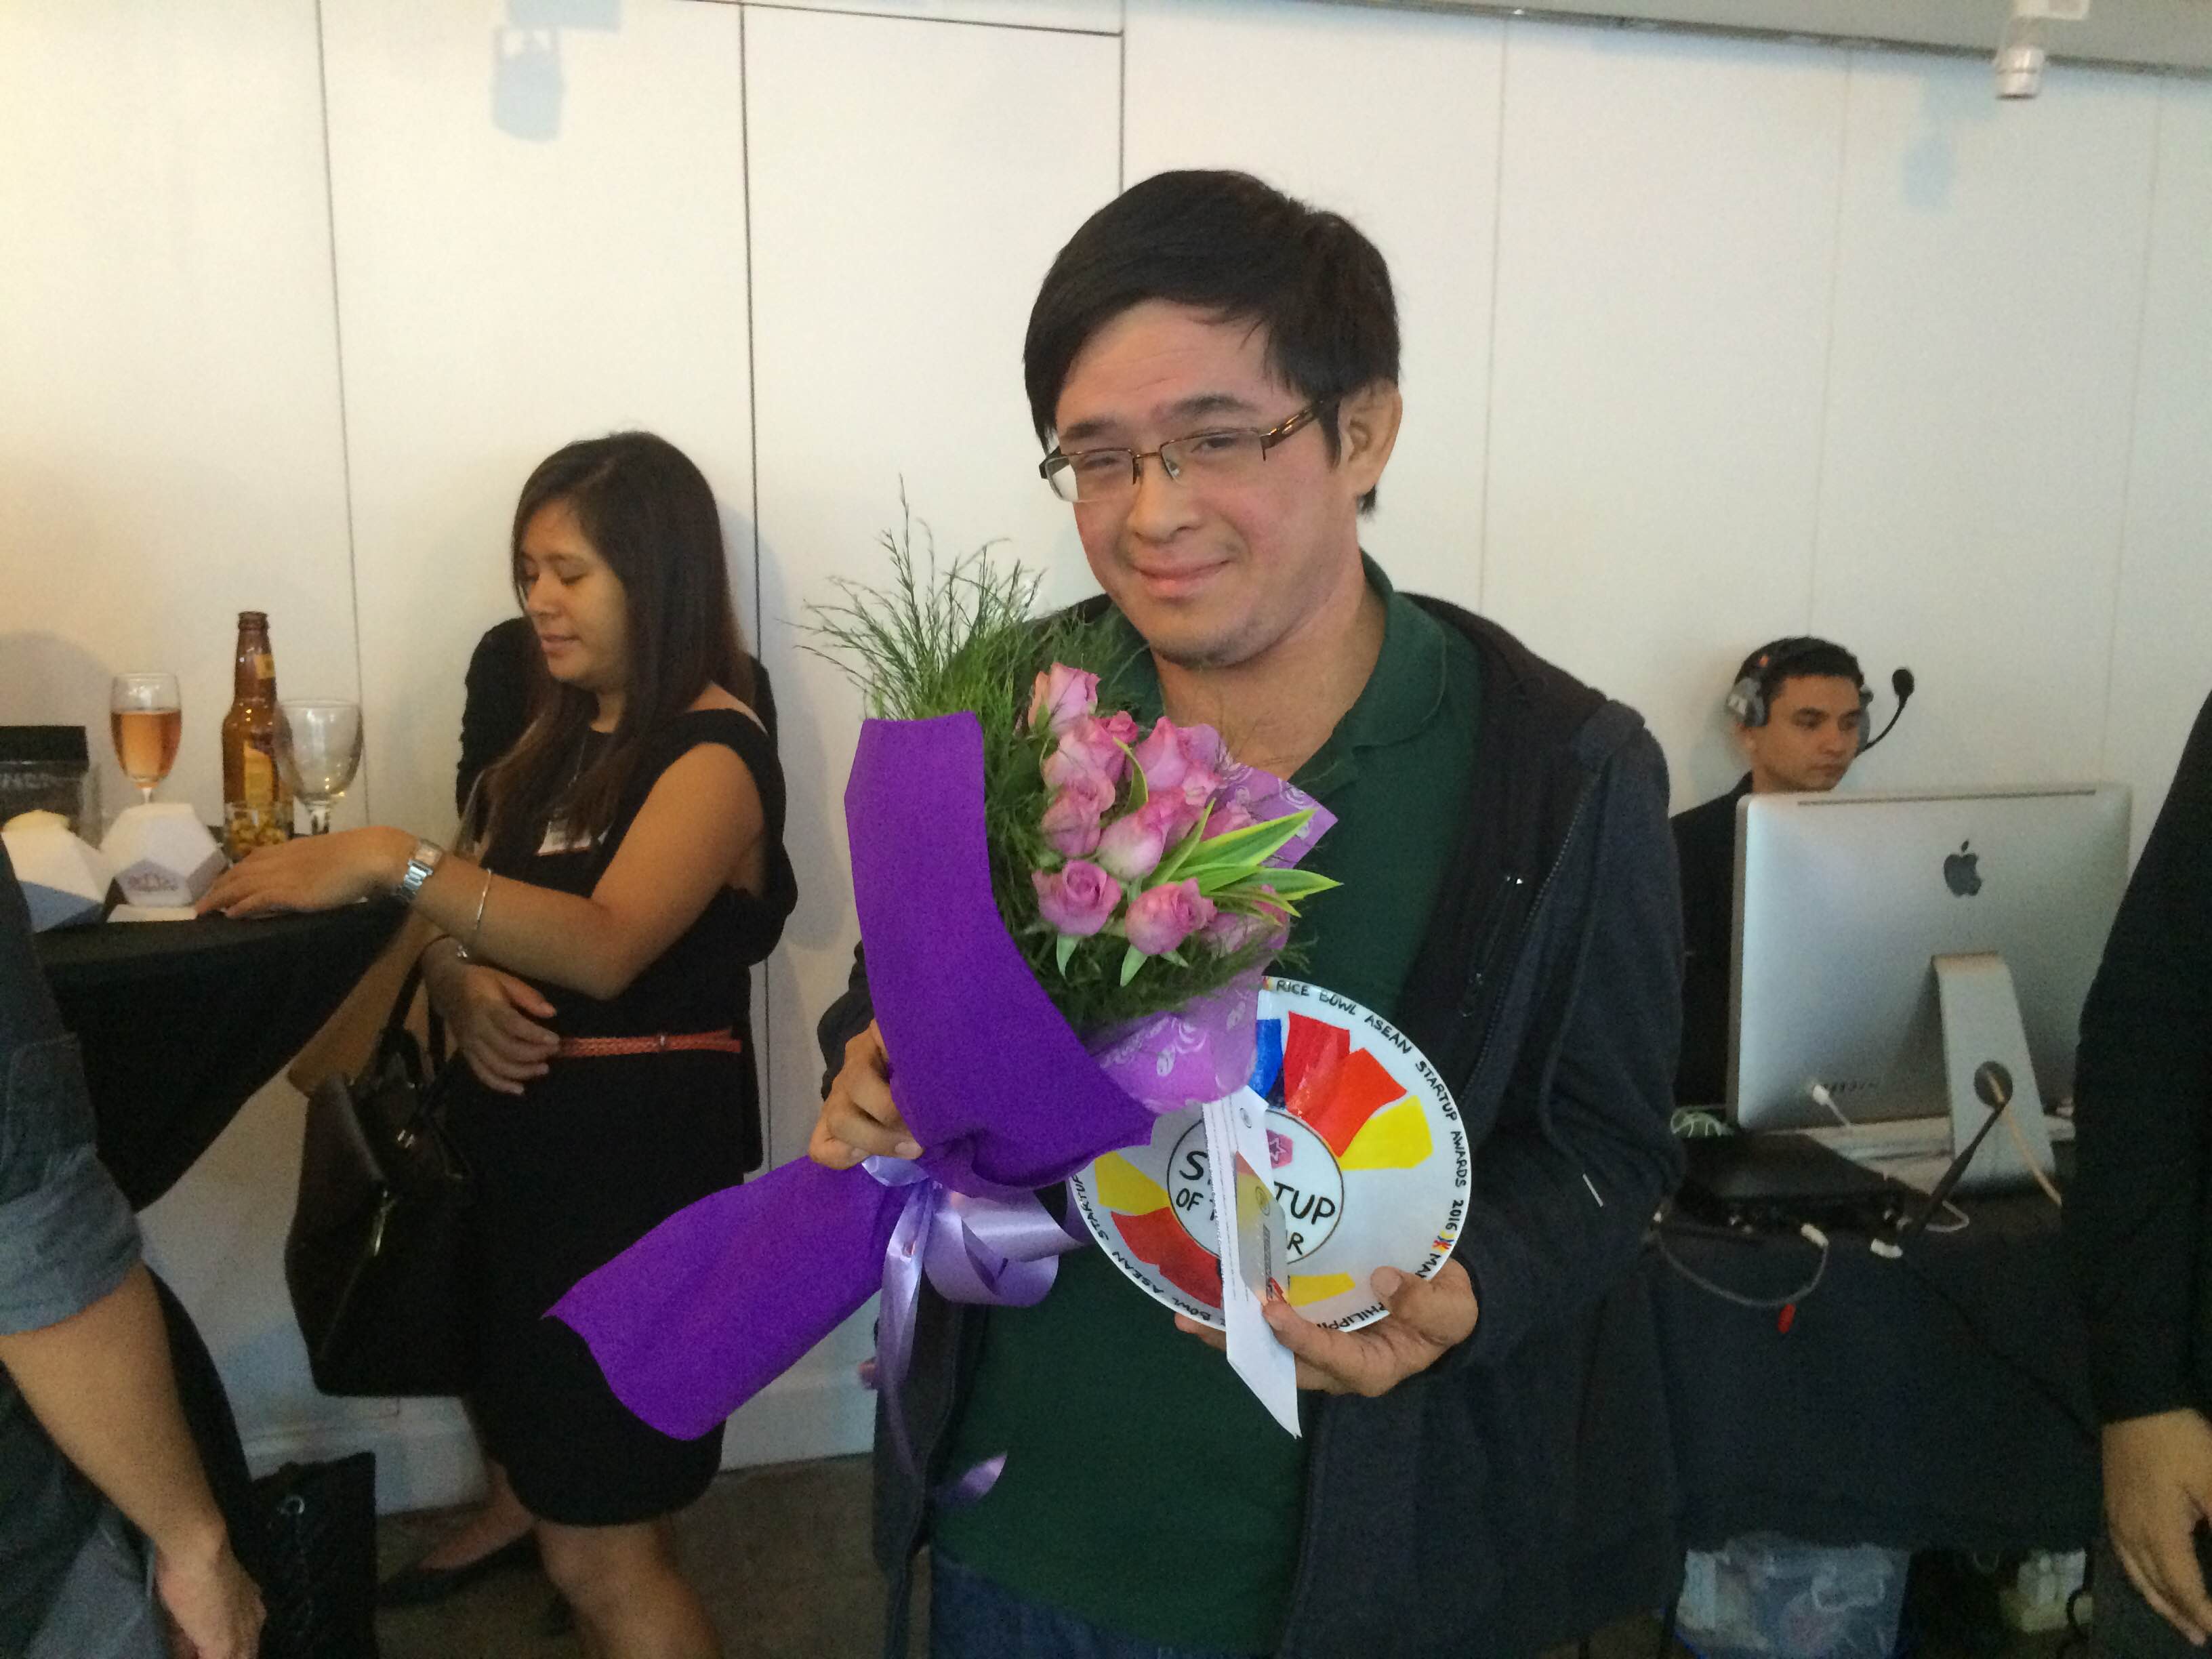 HONORED. Skyeye founder Matthew Cua celebrates after his firm takes home the award for startup of the year.  